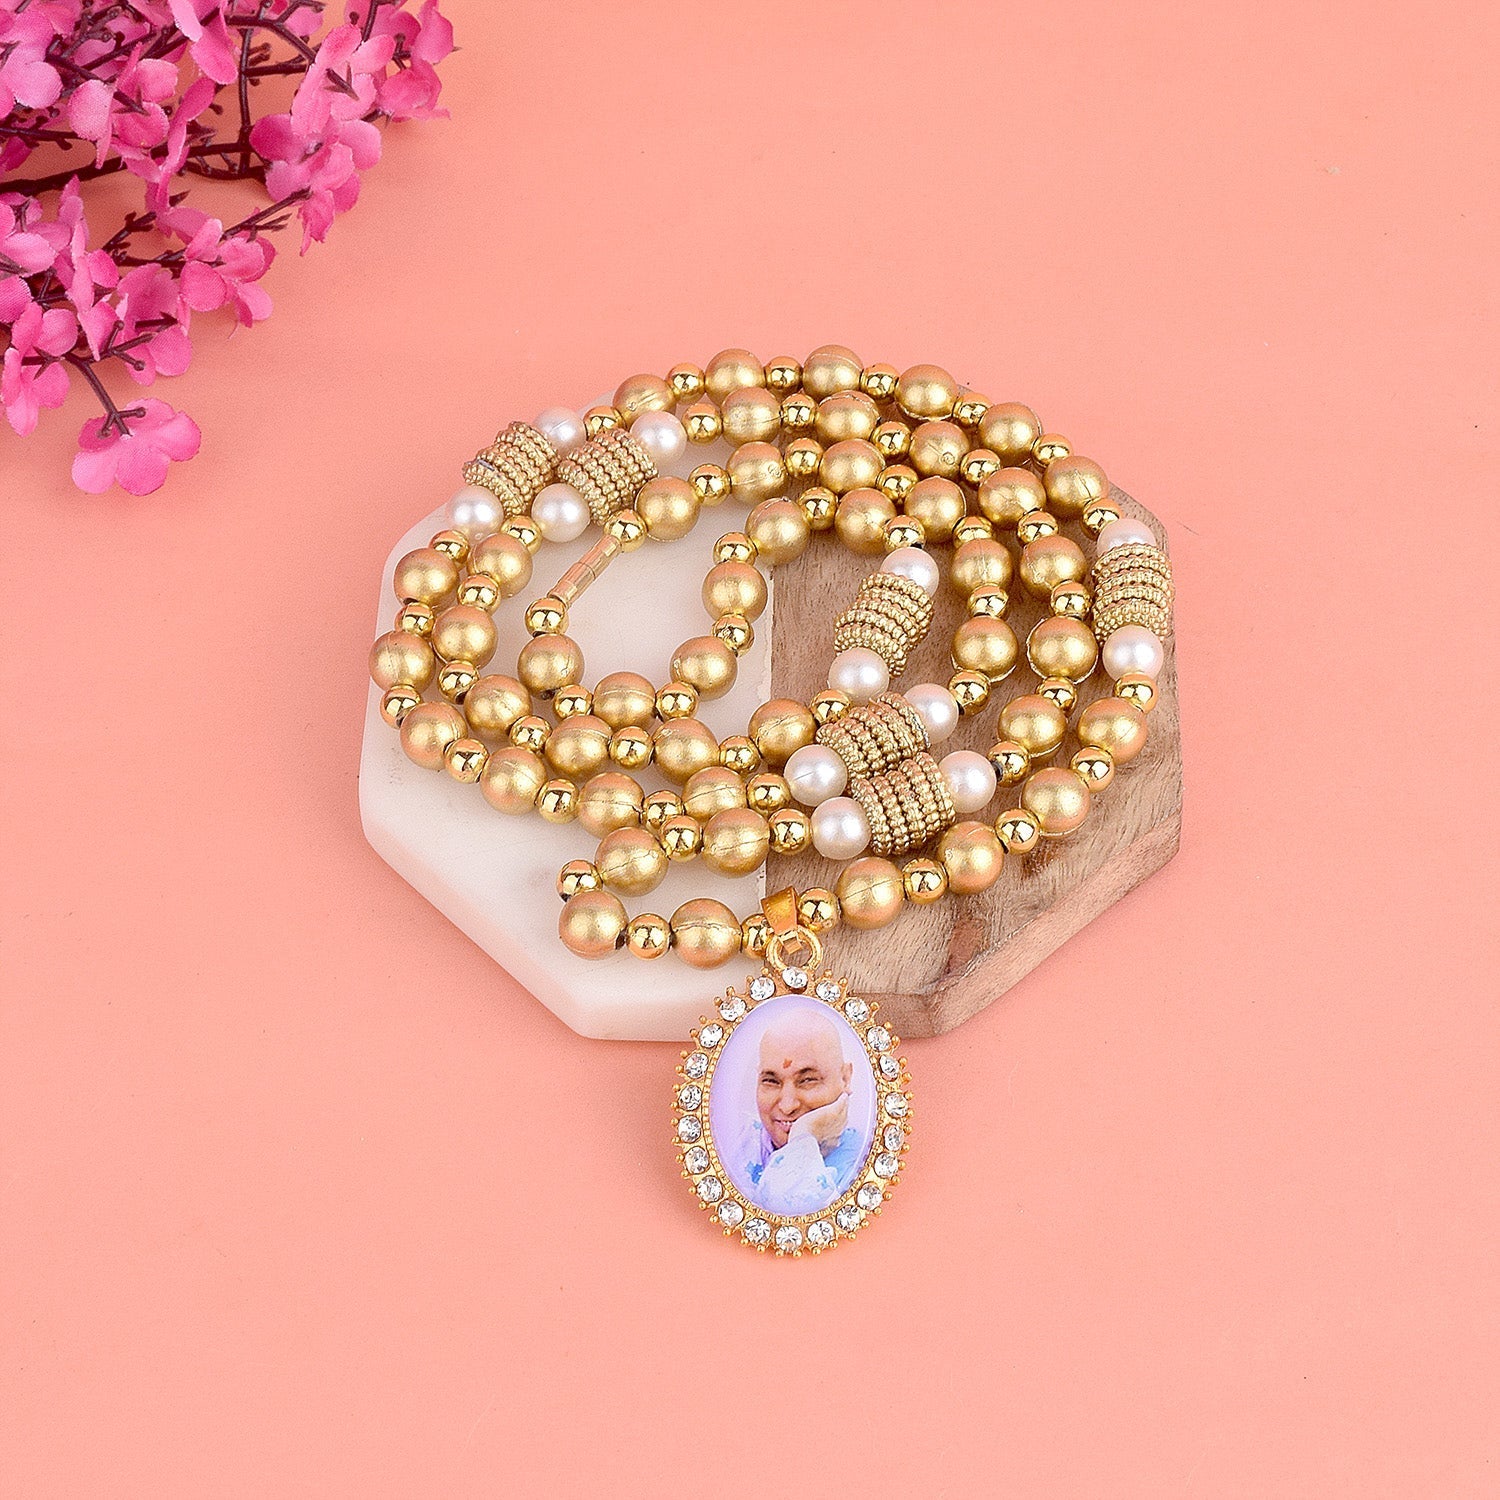 Radiant Reminders: Elevate Your Being with the Guruji Neck Mala